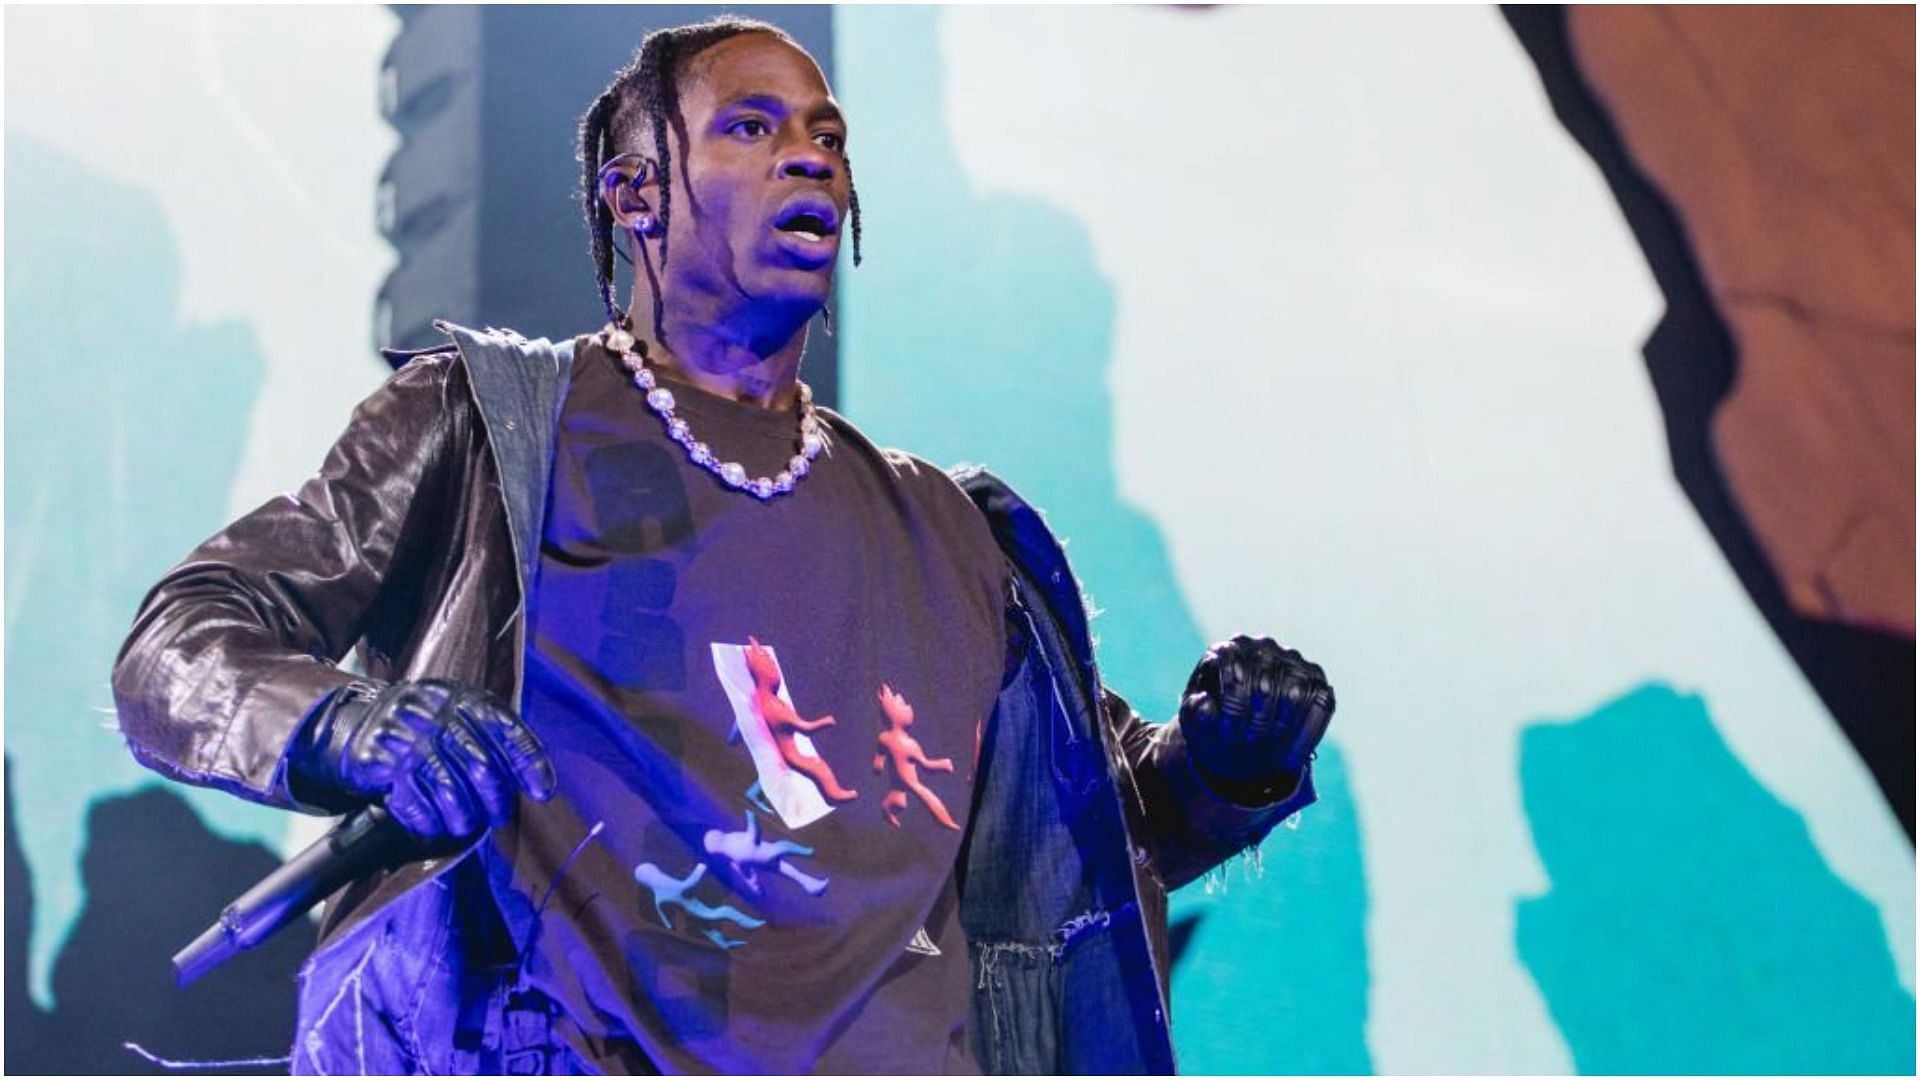 Travis Scott performed for the first time following the Astroworld tragedy (Image via Rick Kern/Getty Images)